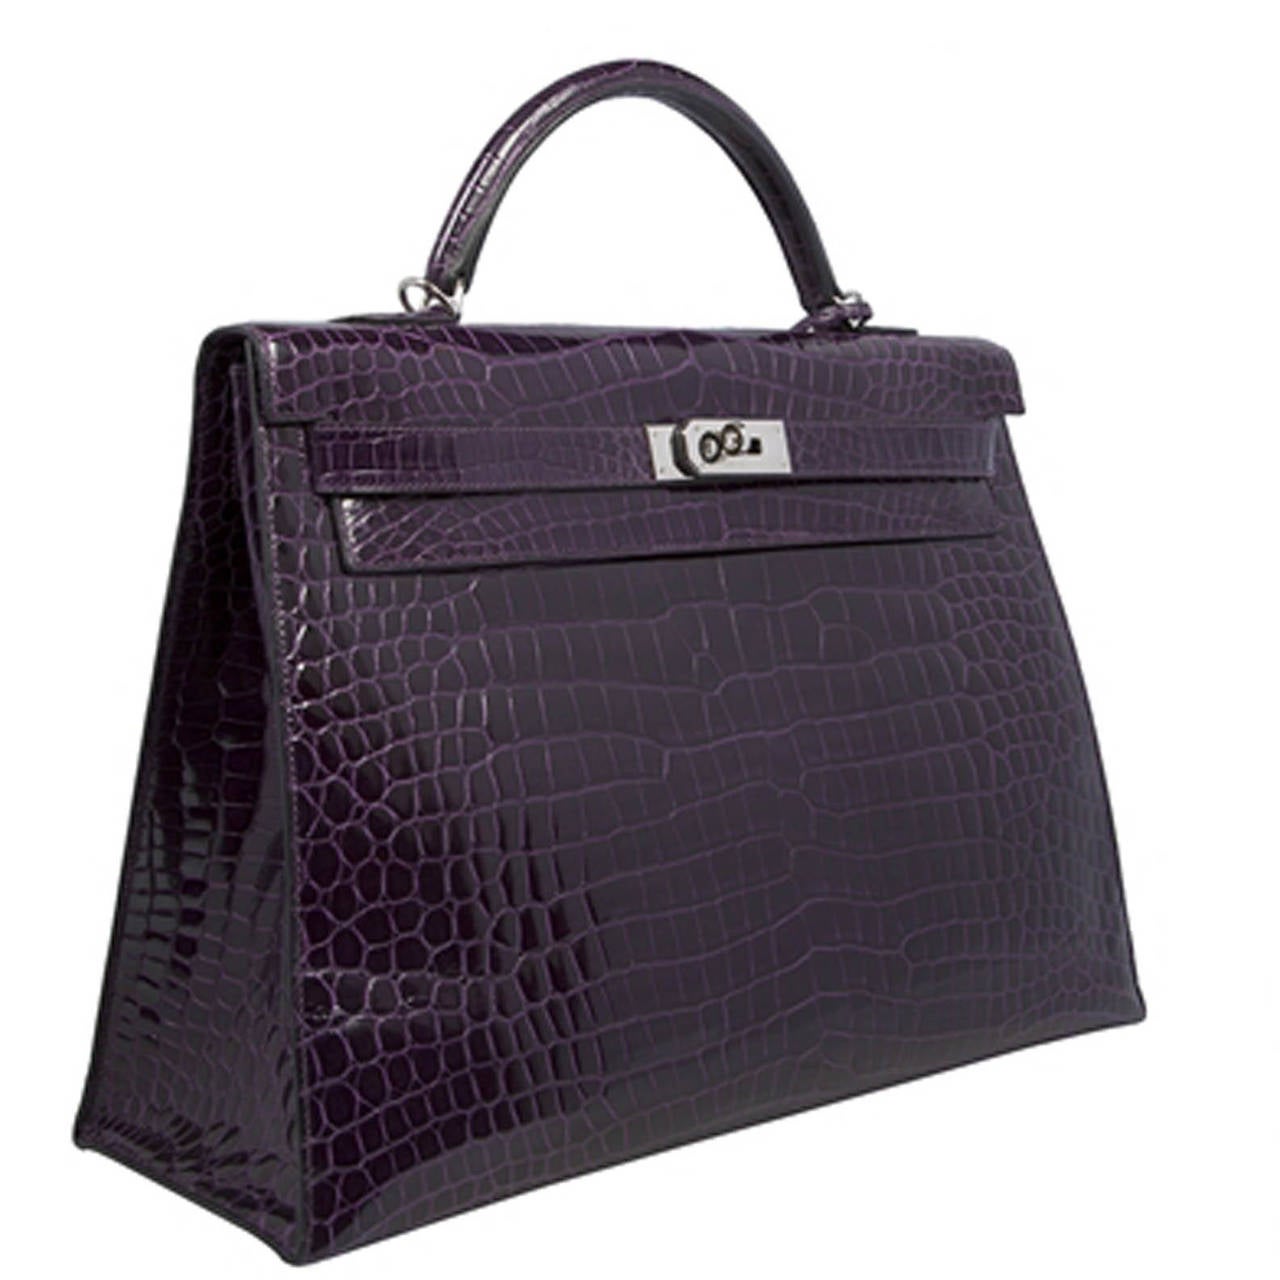 Hermes 40cm Amethyst Crocodile Kelly Shoulder Bag.Invest in a classic with this Hermes Kelly, crafted in Crocodile Leather in an alluring Amethyst colour. Features a single flat top handle, a branded palladium twist-lock hardware, protective